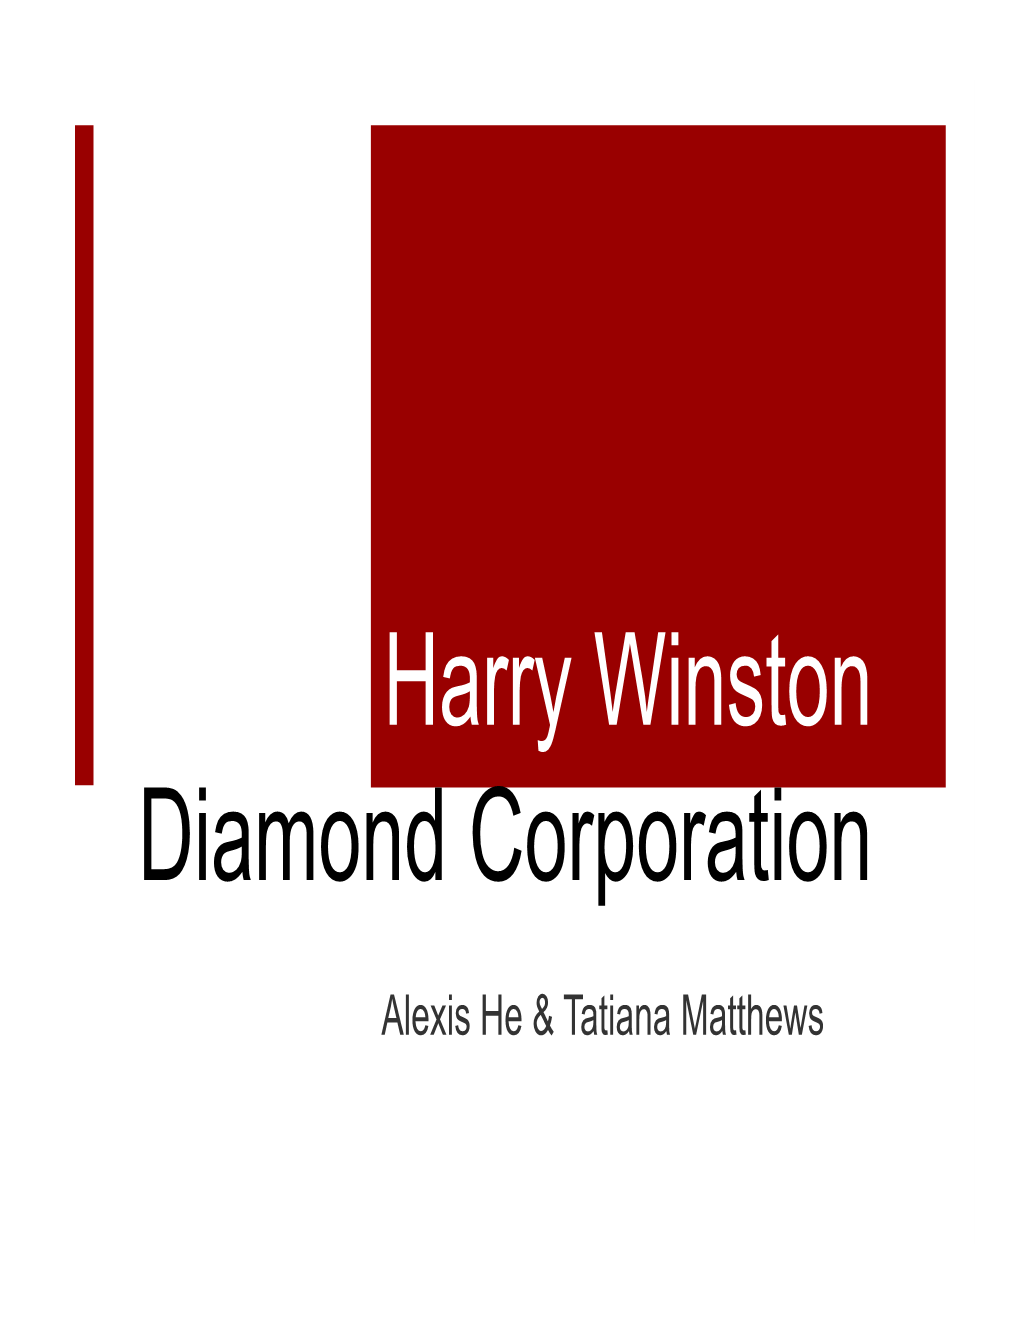 Harry Winston Diamond Corp., Which Owns 100 Percent of the Shares in Harry Winston, Inc